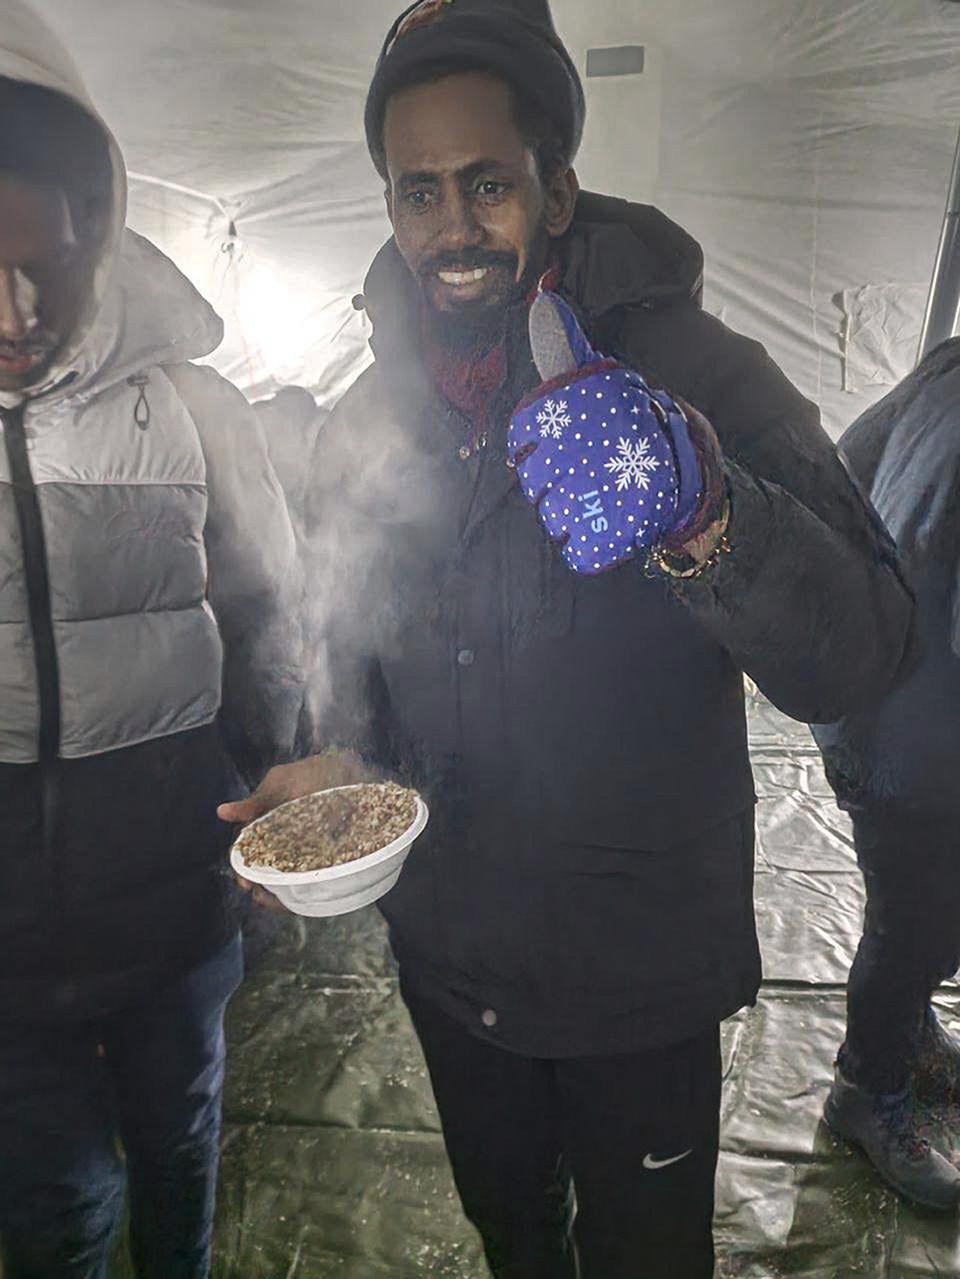 In this handout photo released by Governor of Murmansk region Andrey Chibis' telegram channel on Wednesday, Nov. 22, 2023, a migrant gestures holding a hot meal as other migrants gather getting hot drinks inside a tent near the border with Finland at the Salla checkpoint, one of the still open border checkpoints situated in the Kandalaksha district of the Murmansk region, about 1300 km (812 miles) north of Moscow, Russia. (Governor of Murmansk region Andrey Chibis' telegram channel via AP)